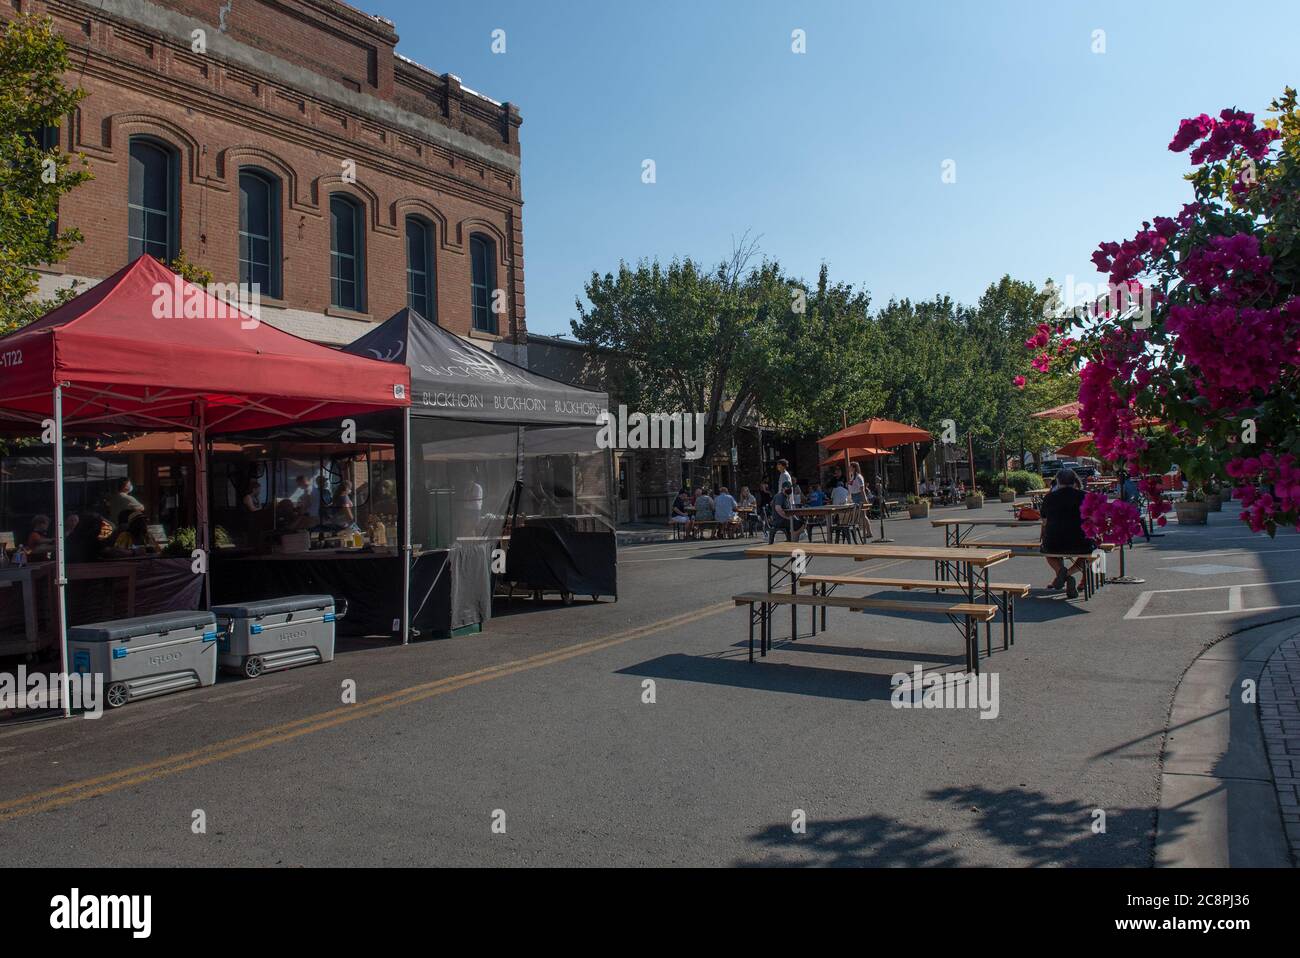 Winters, California, USA. July 25, 2020. The small town of Winters has closed a portion of the Main Street to allow restaurants to expand outside to allow customers dinning Stock Photo